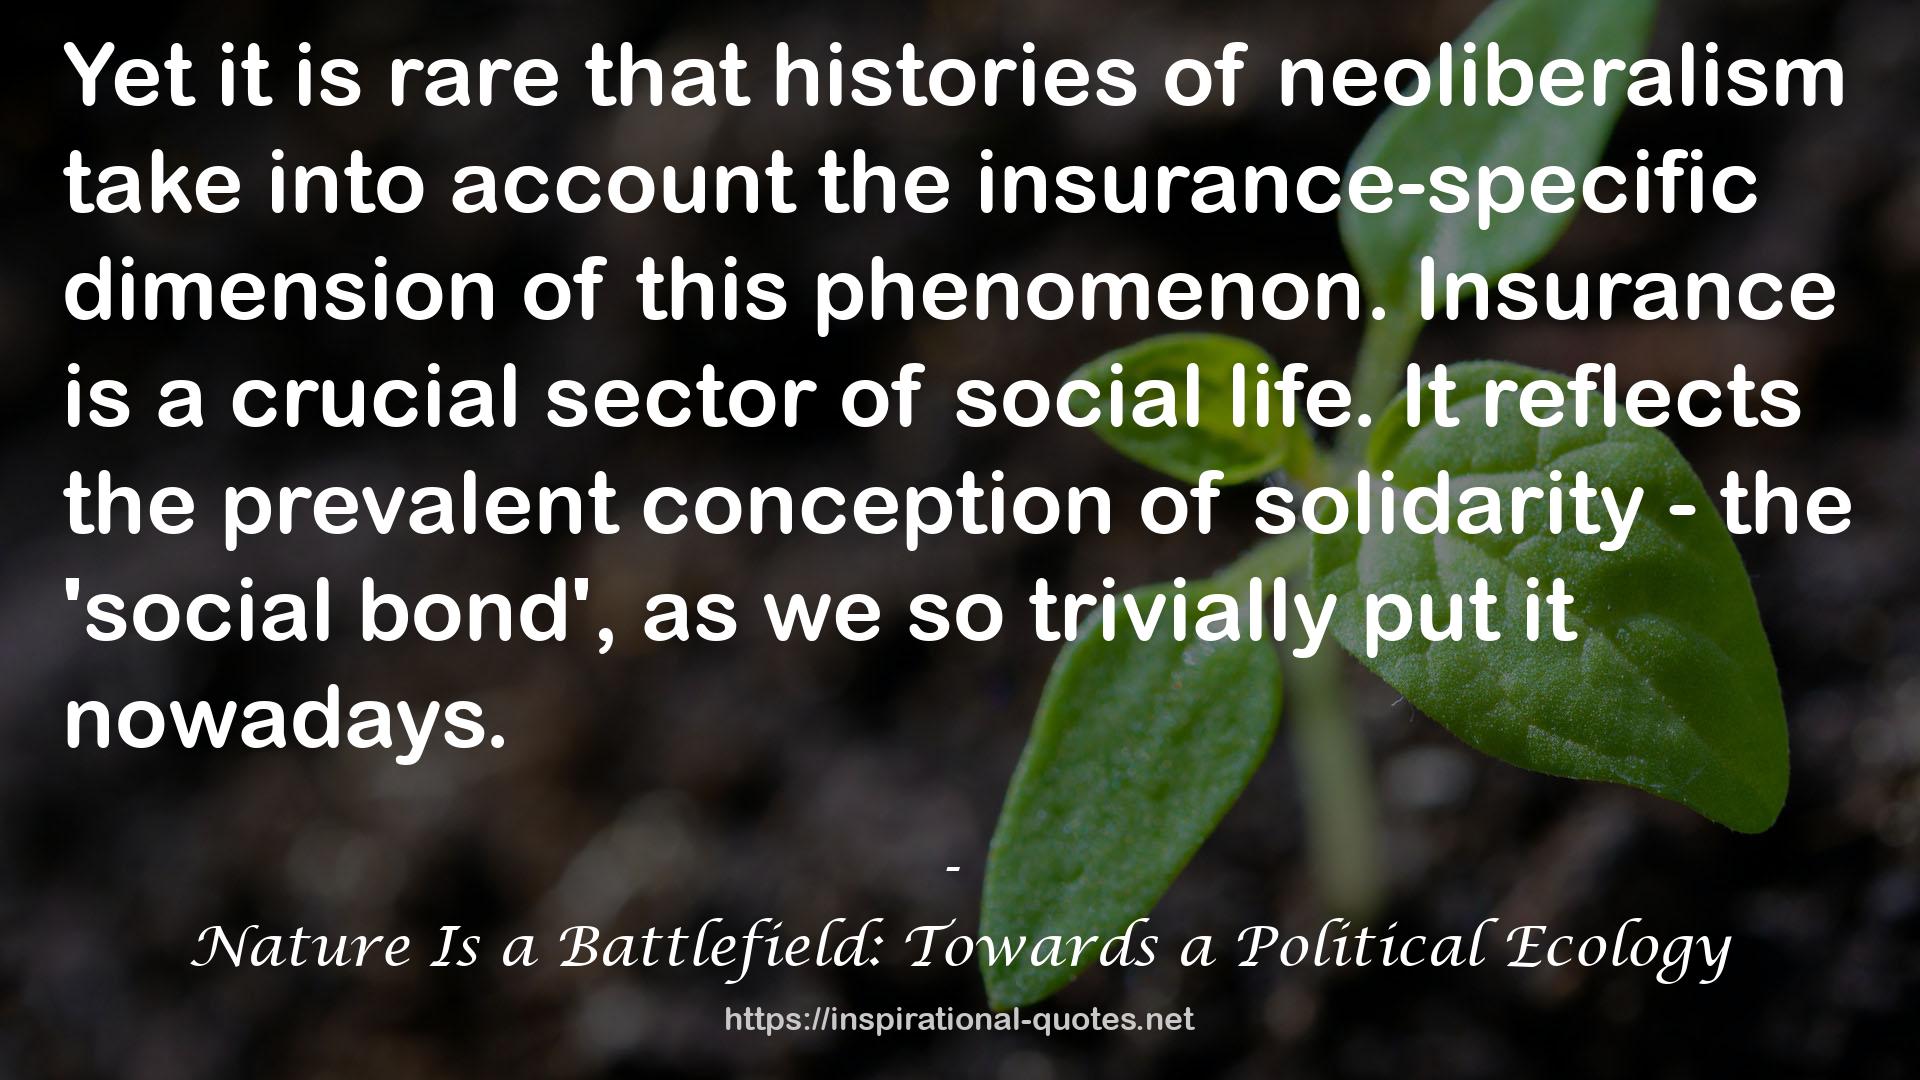 Nature Is a Battlefield: Towards a Political Ecology QUOTES